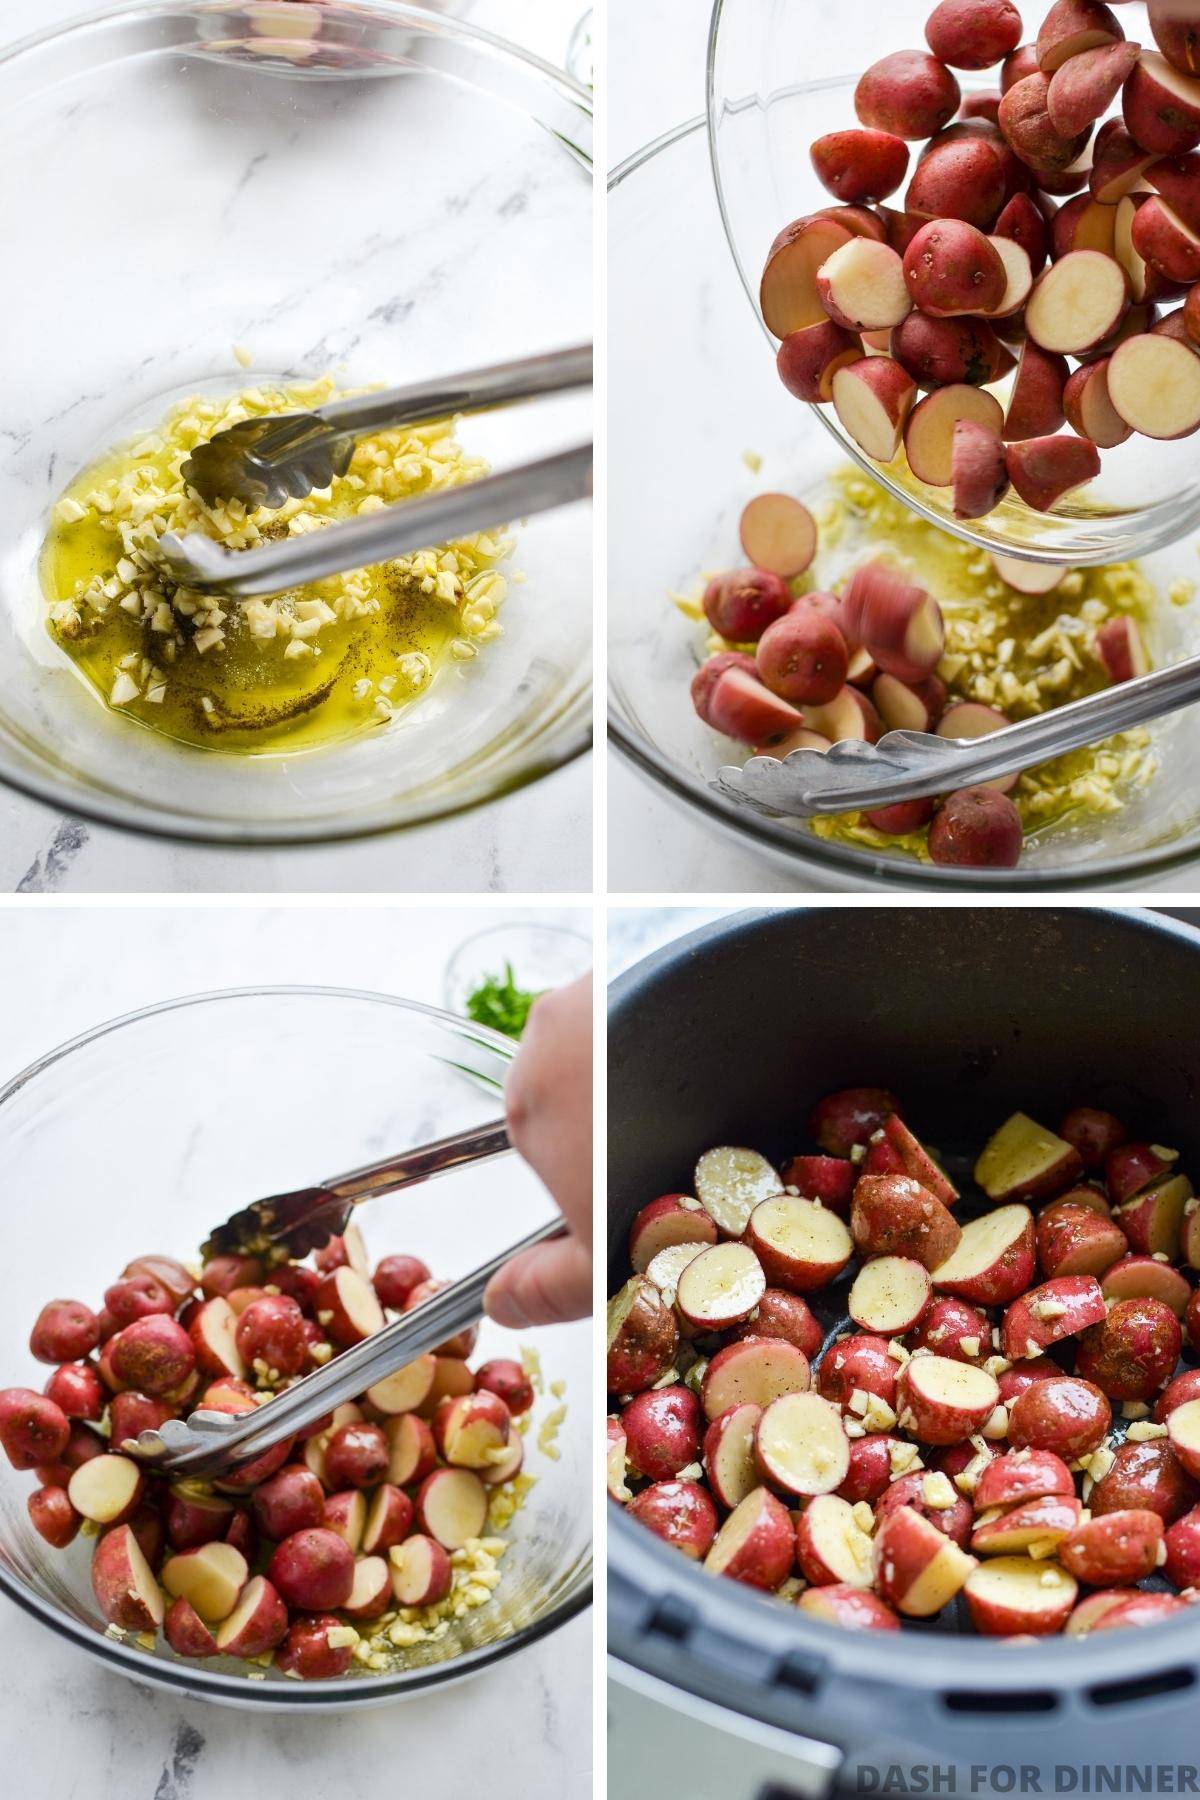 Combining baby potatoes with olive oil and adding to an air fryer basket.